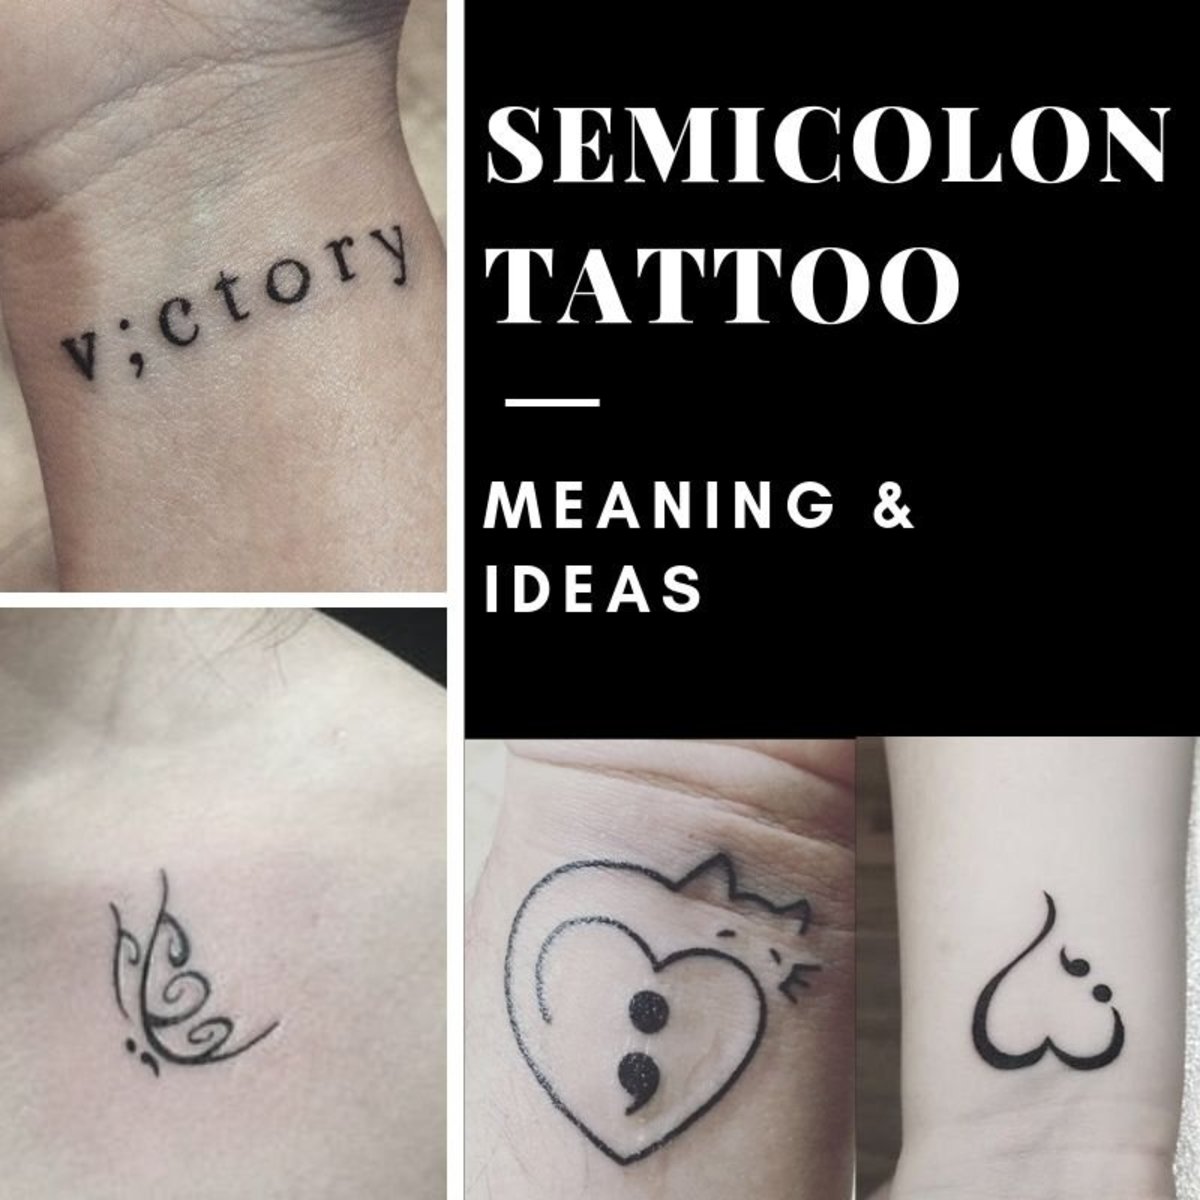 Positivity Tattoos: Images and Symbols for Positivity | HealthyPlace